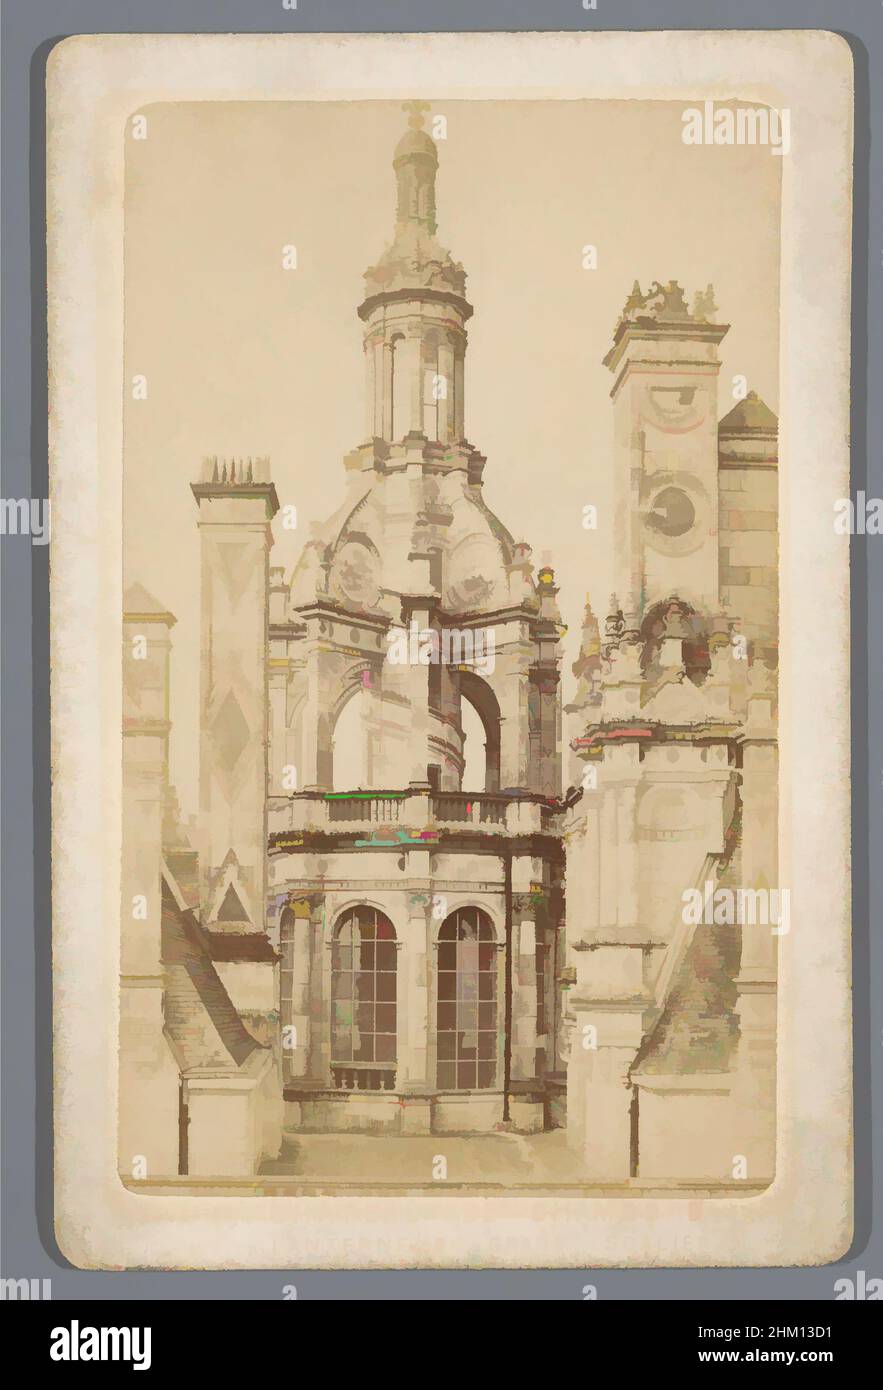 Art inspired by Lantern above the double spiral staircase in the castle of Chambord, France, Lanterne du Grand Escalier, Château de Chambord, Chambord, 1855 - 1885, paper, cardboard, albumen print, height 106 mm × width 69 mm, Classic works modernized by Artotop with a splash of modernity. Shapes, color and value, eye-catching visual impact on art. Emotions through freedom of artworks in a contemporary way. A timeless message pursuing a wildly creative new direction. Artists turning to the digital medium and creating the Artotop NFT Stock Photo